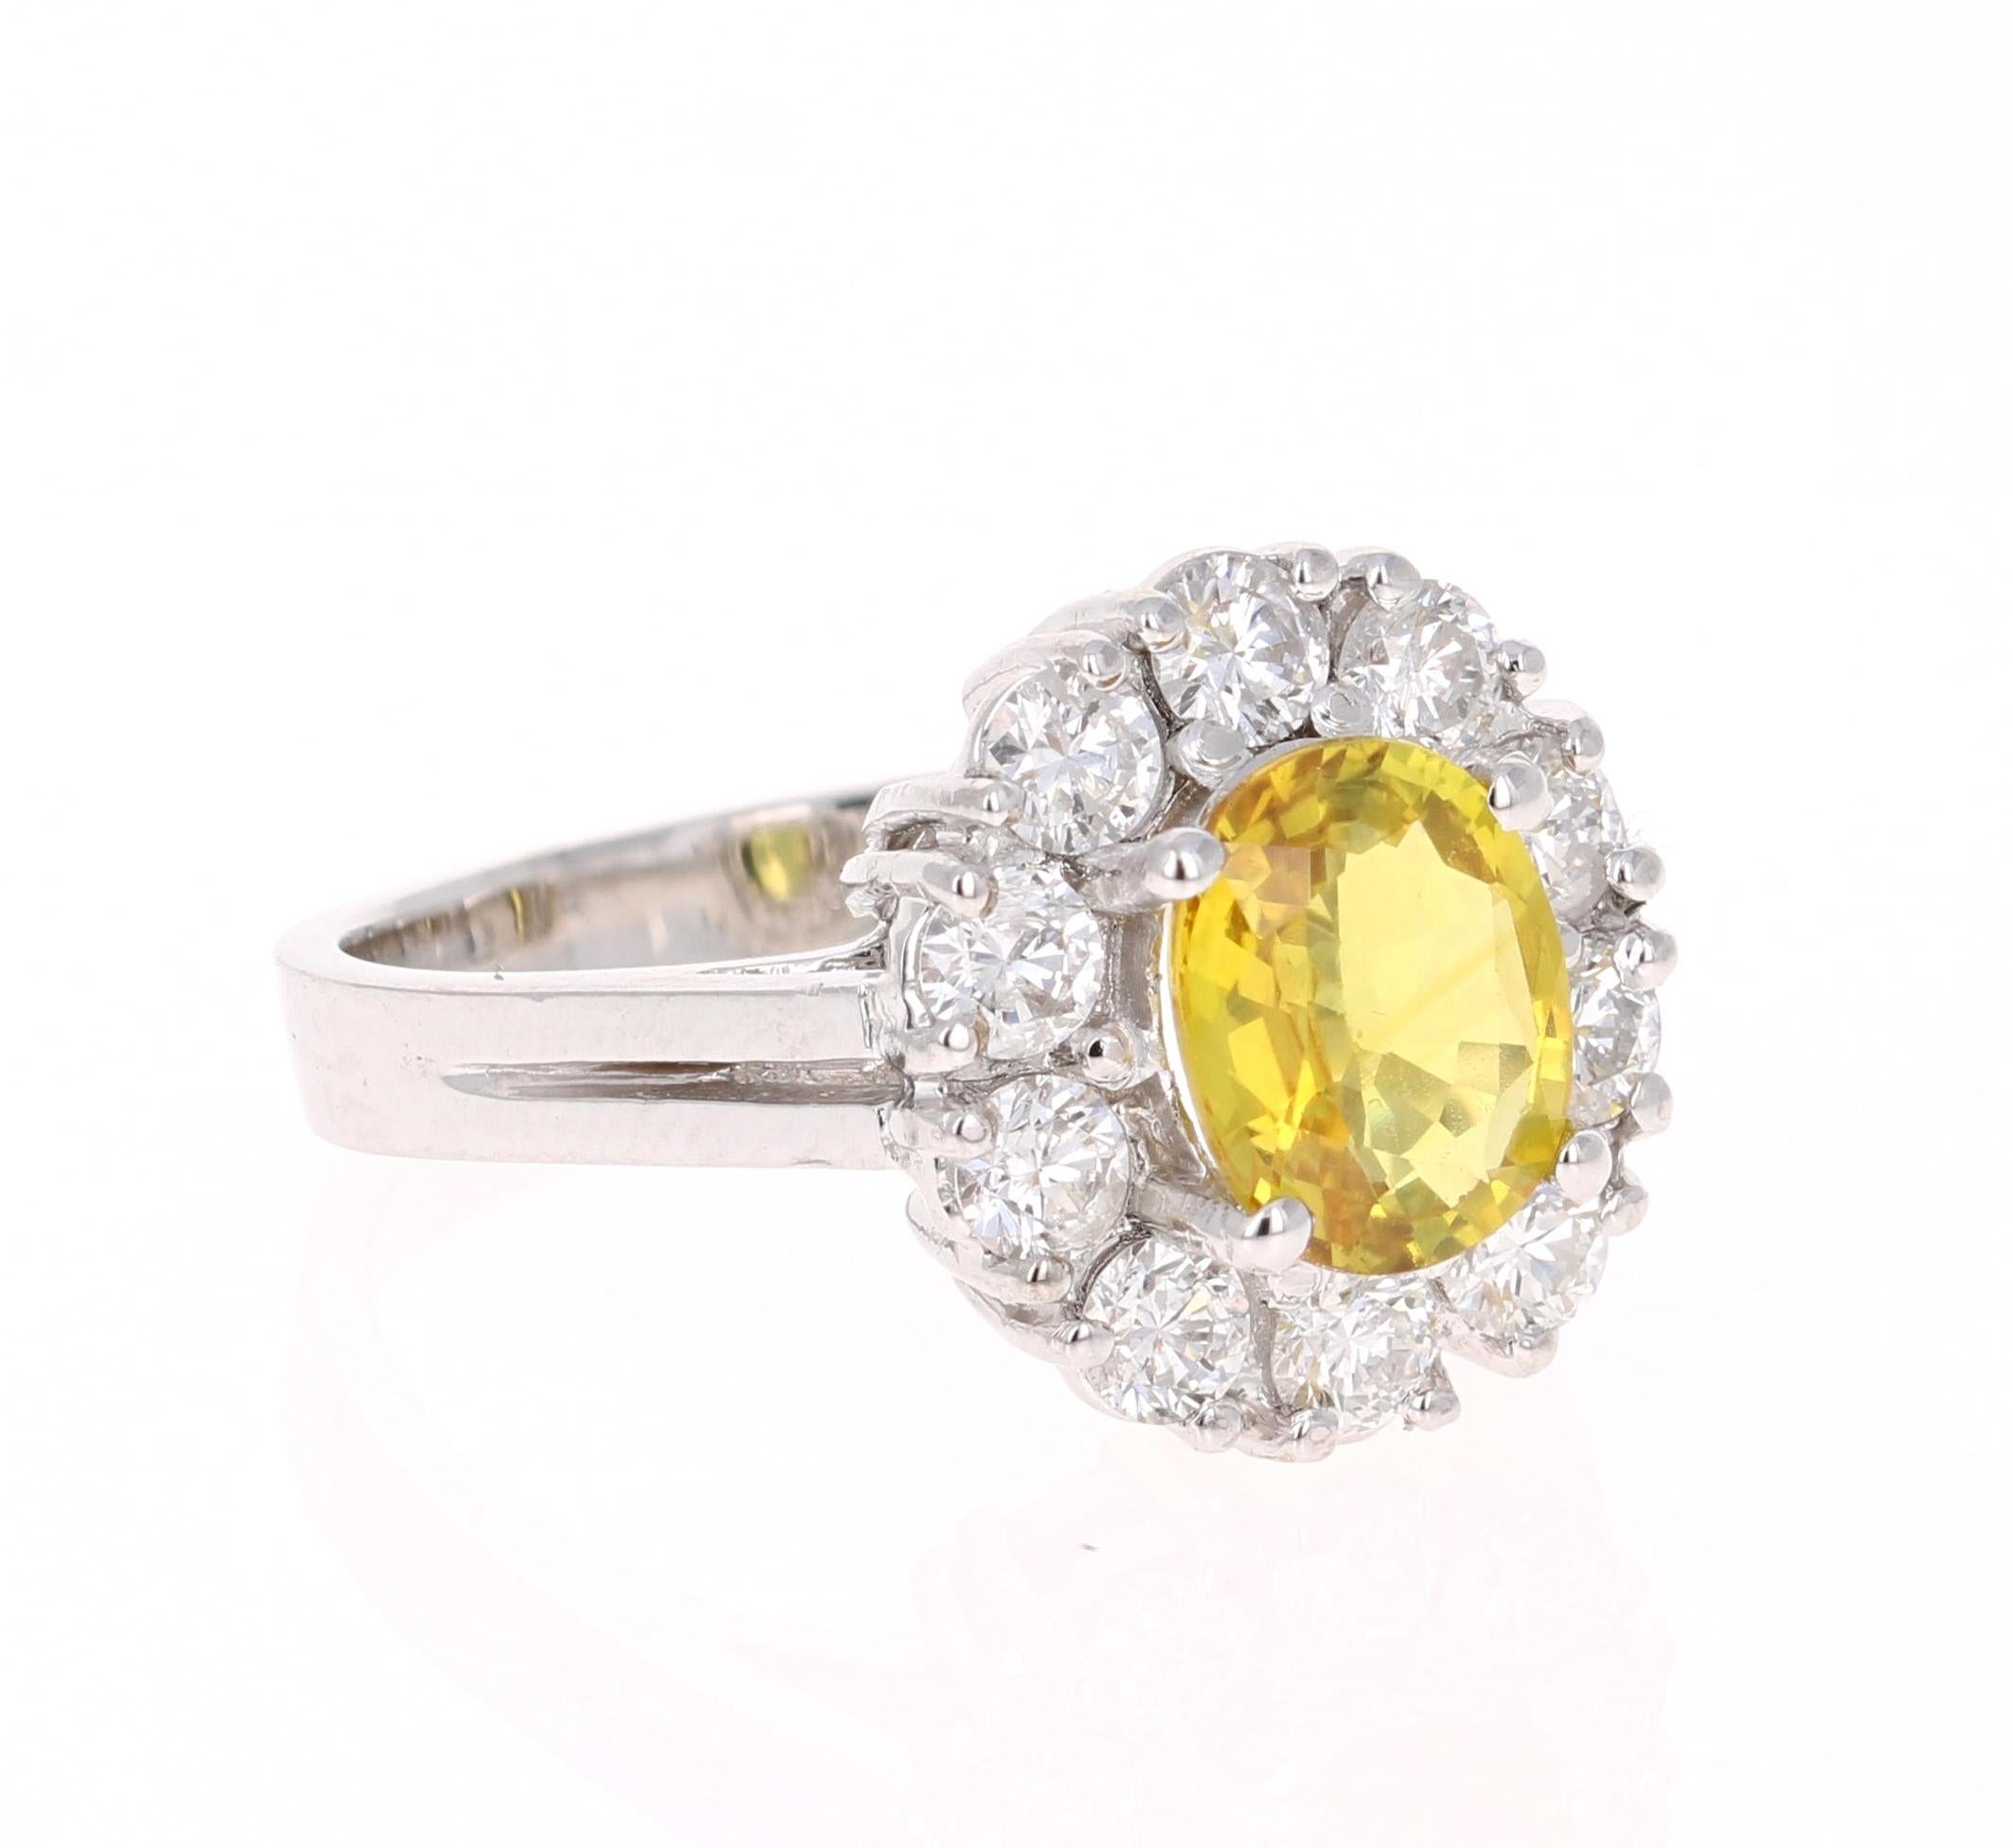 A gorgeous Yellow Sapphire Ring in a classic ballerina setting! This gorgeous Yellow Sapphire is a natural, Oval Cut Sapphire that weighs 1.69 carats. 
It has a halo of 10 Round Cut Diamonds that weigh 0.97 carats (Clarity: SI, Color: F). 
The total